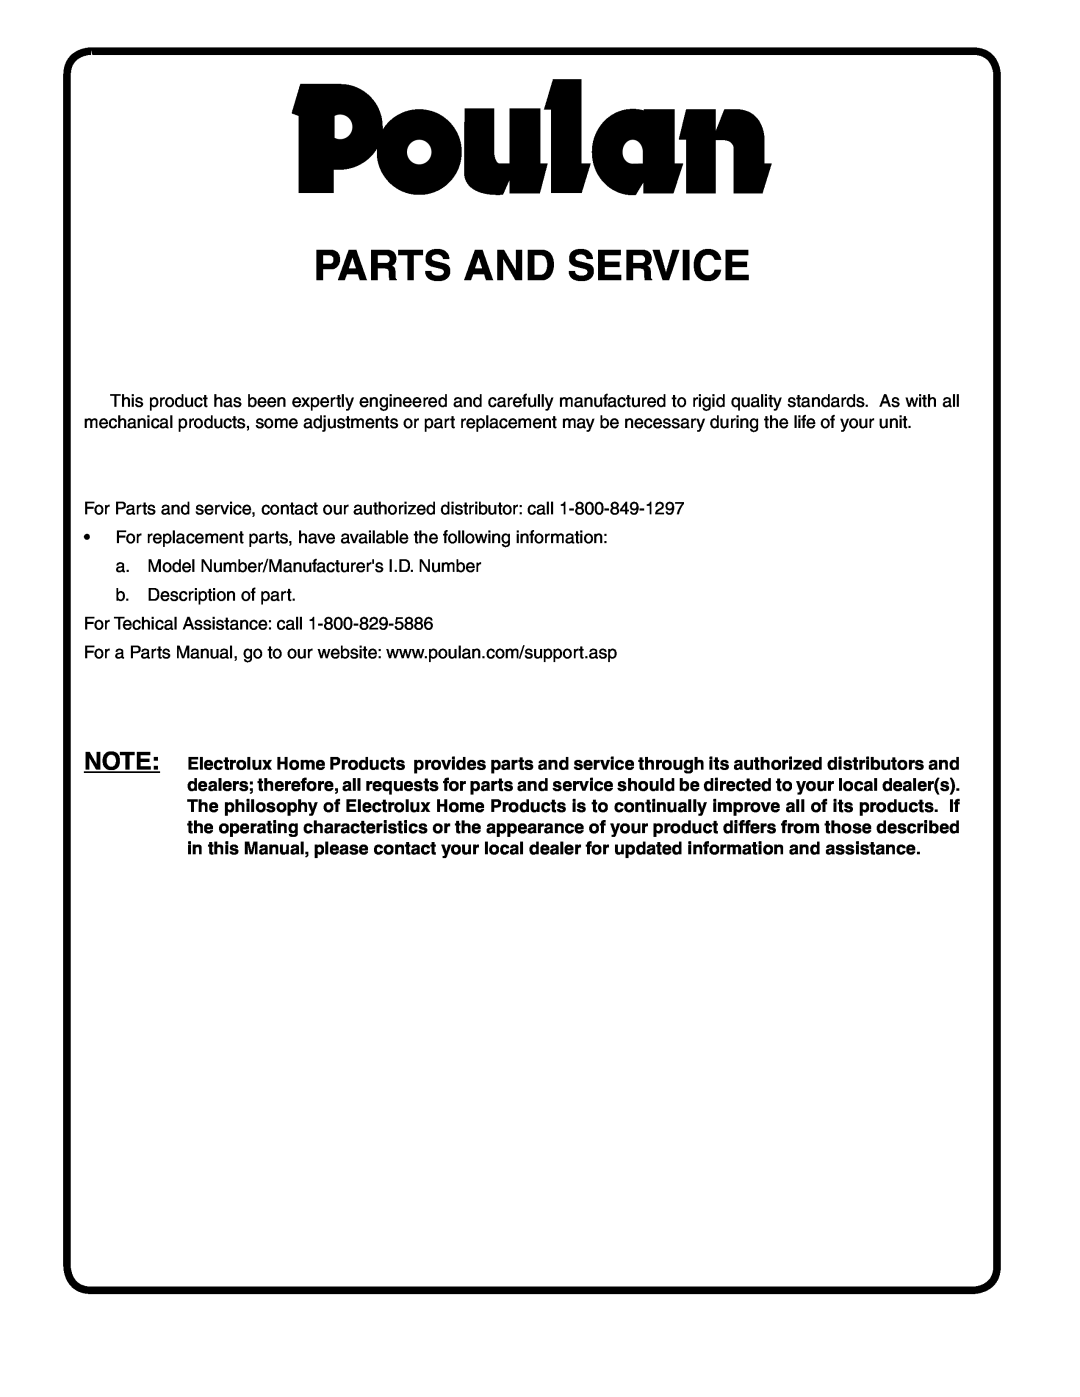 Poulan PD15538LT manual Parts And Service 